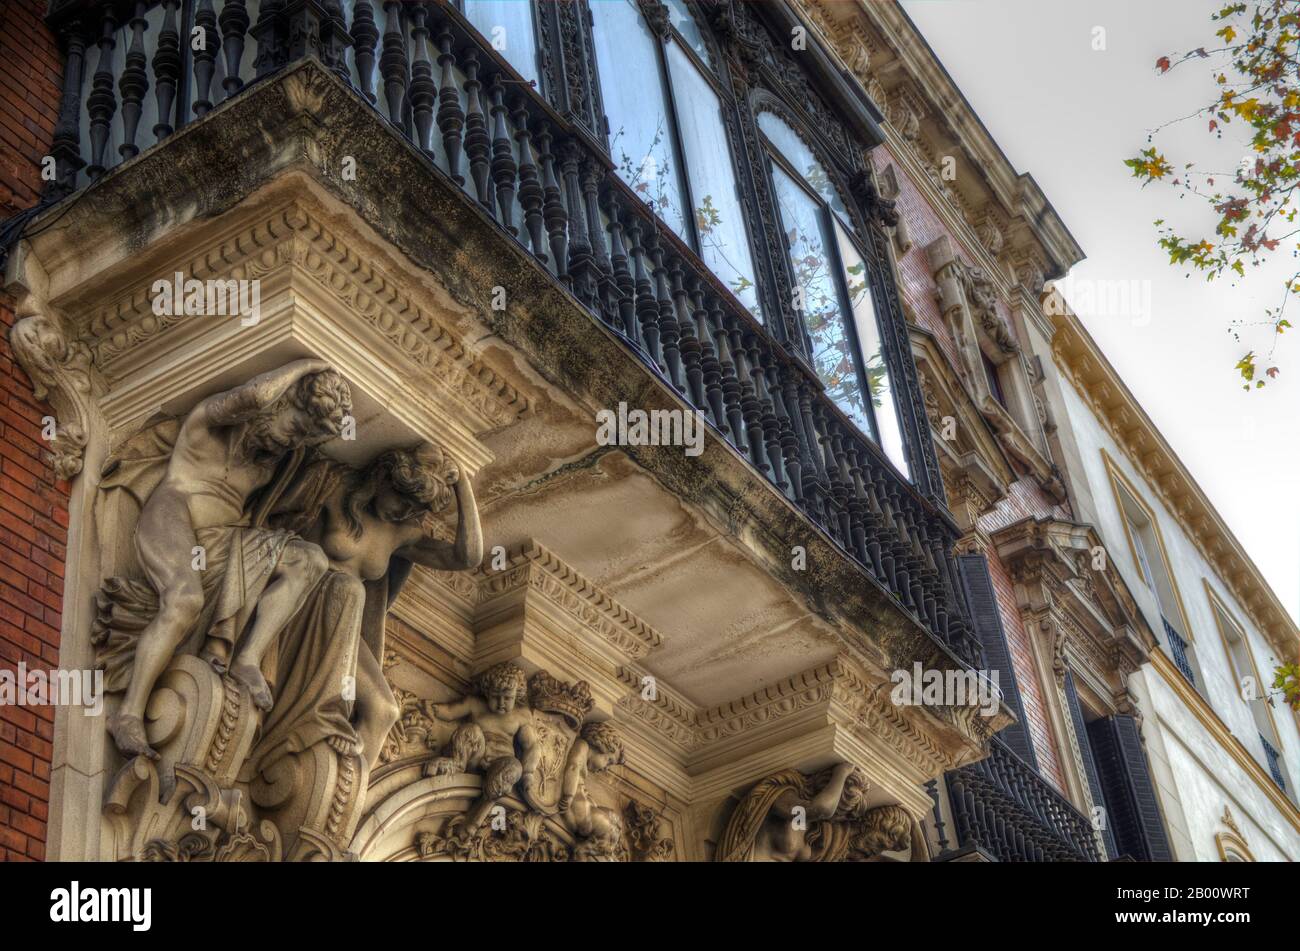 Atlas and Caryatid supporting a balcony in Seville, Andalusia, Spain. Detail. Stock Photo